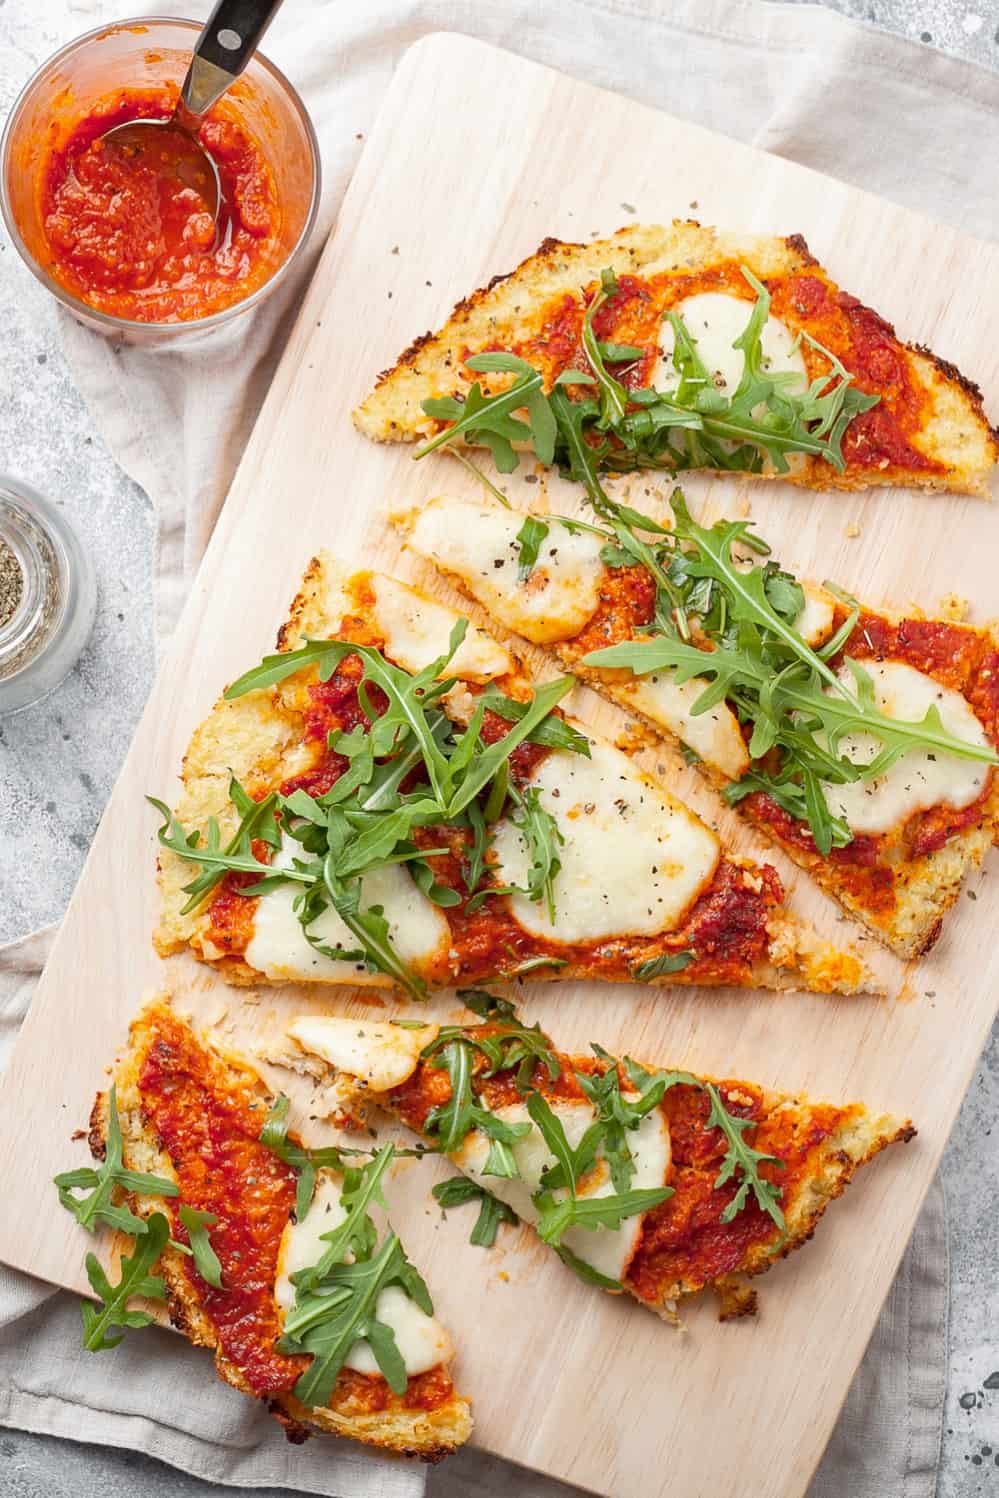 What is In Store-Bought Cauliflower Pizza Crust